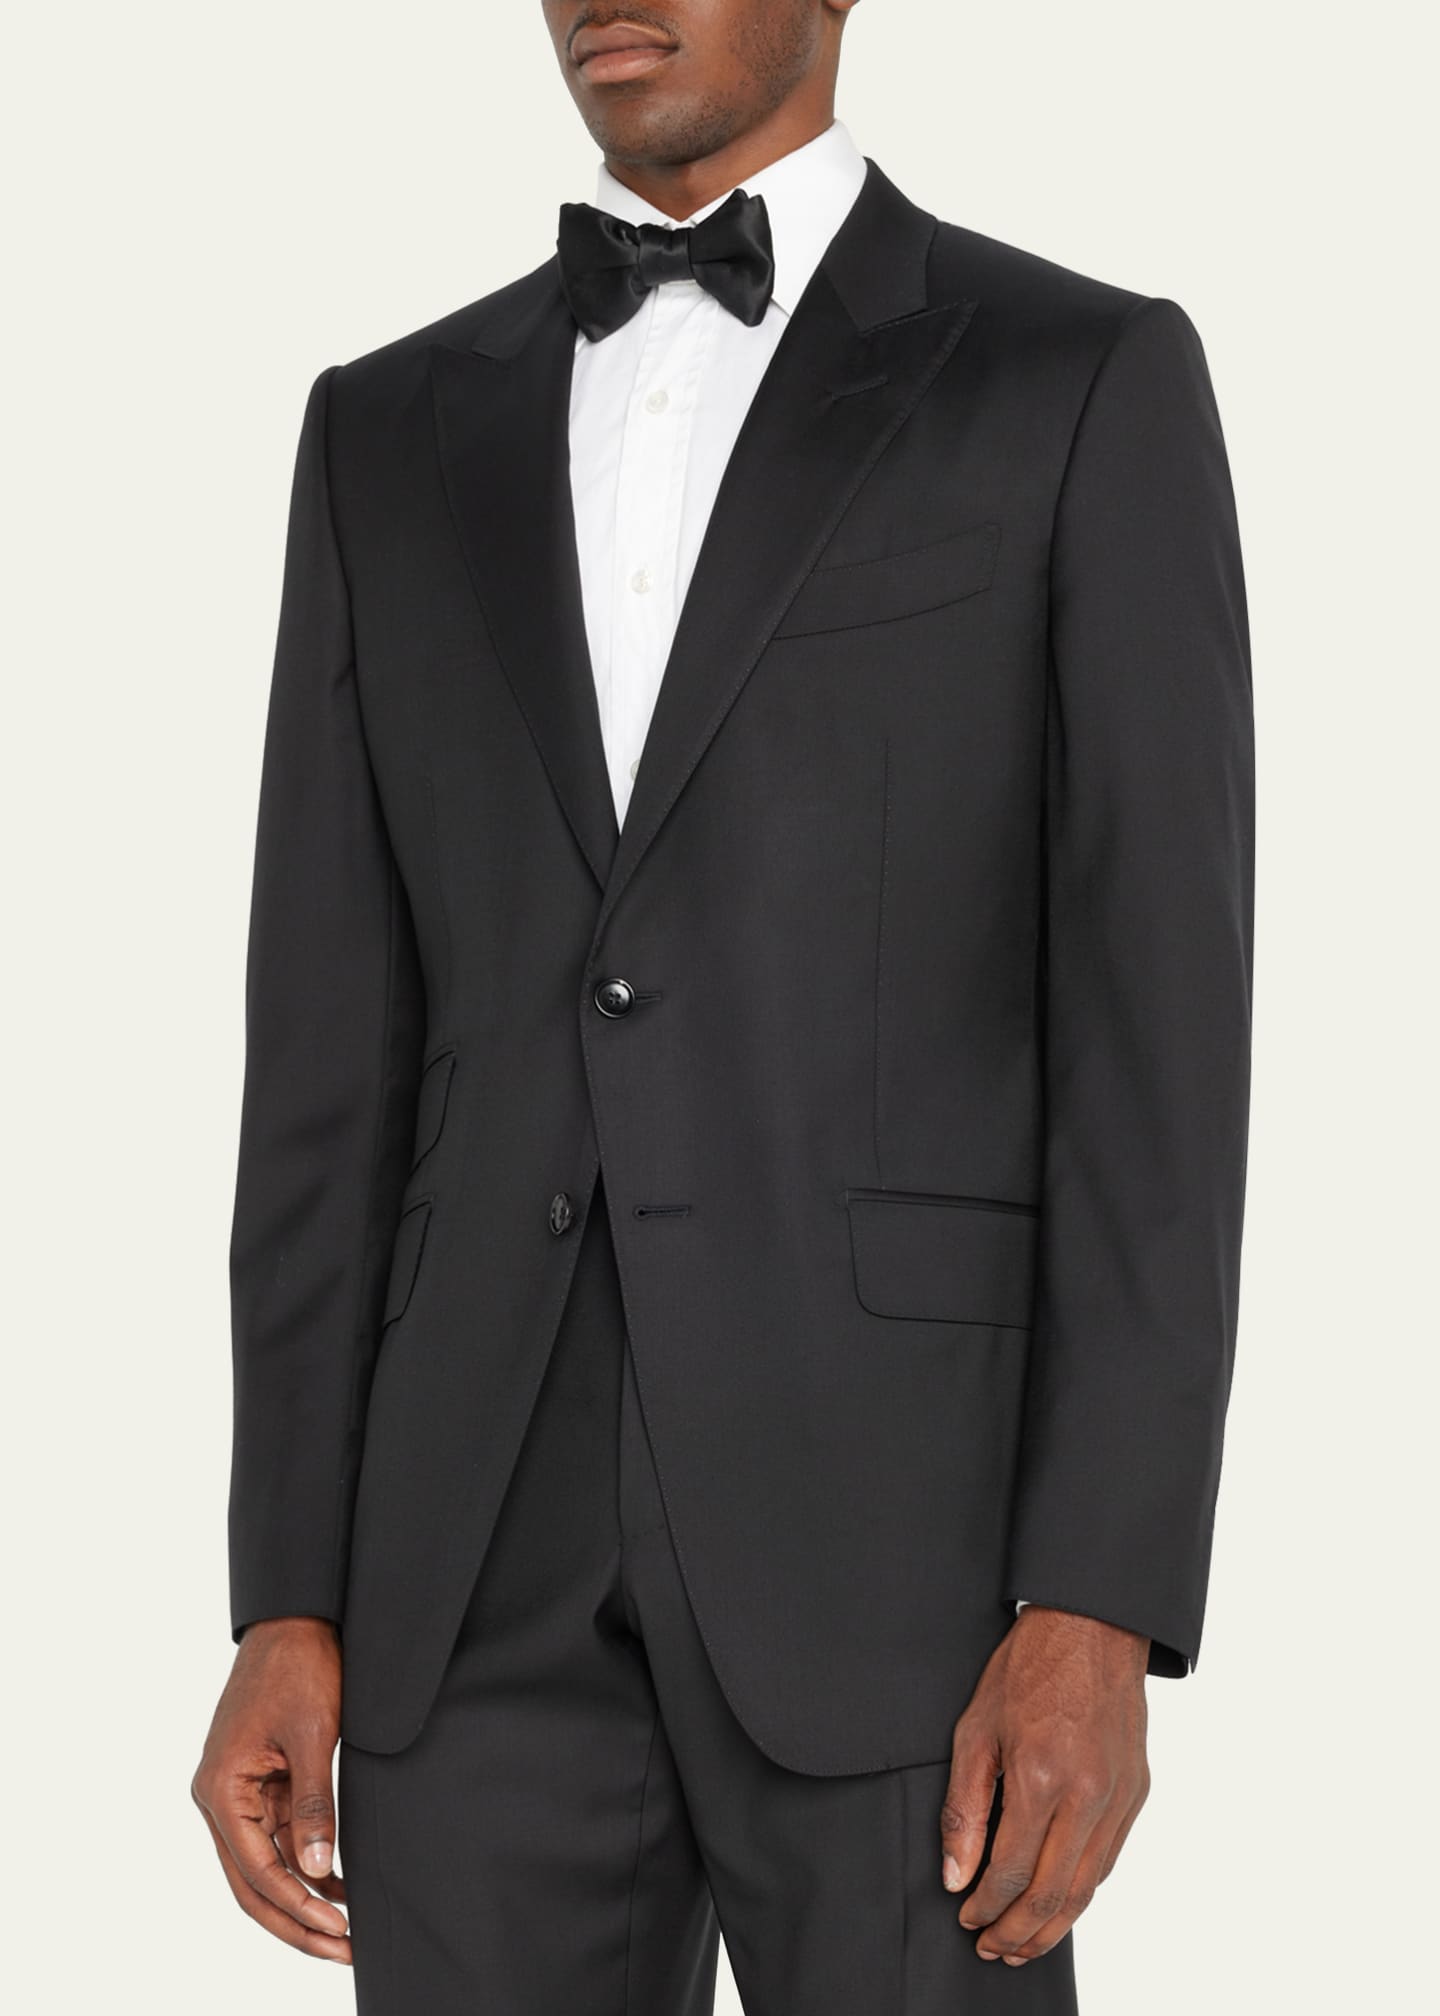 TOM FORD Men's Solid Master Twill Two-Piece Suit - Bergdorf Goodman